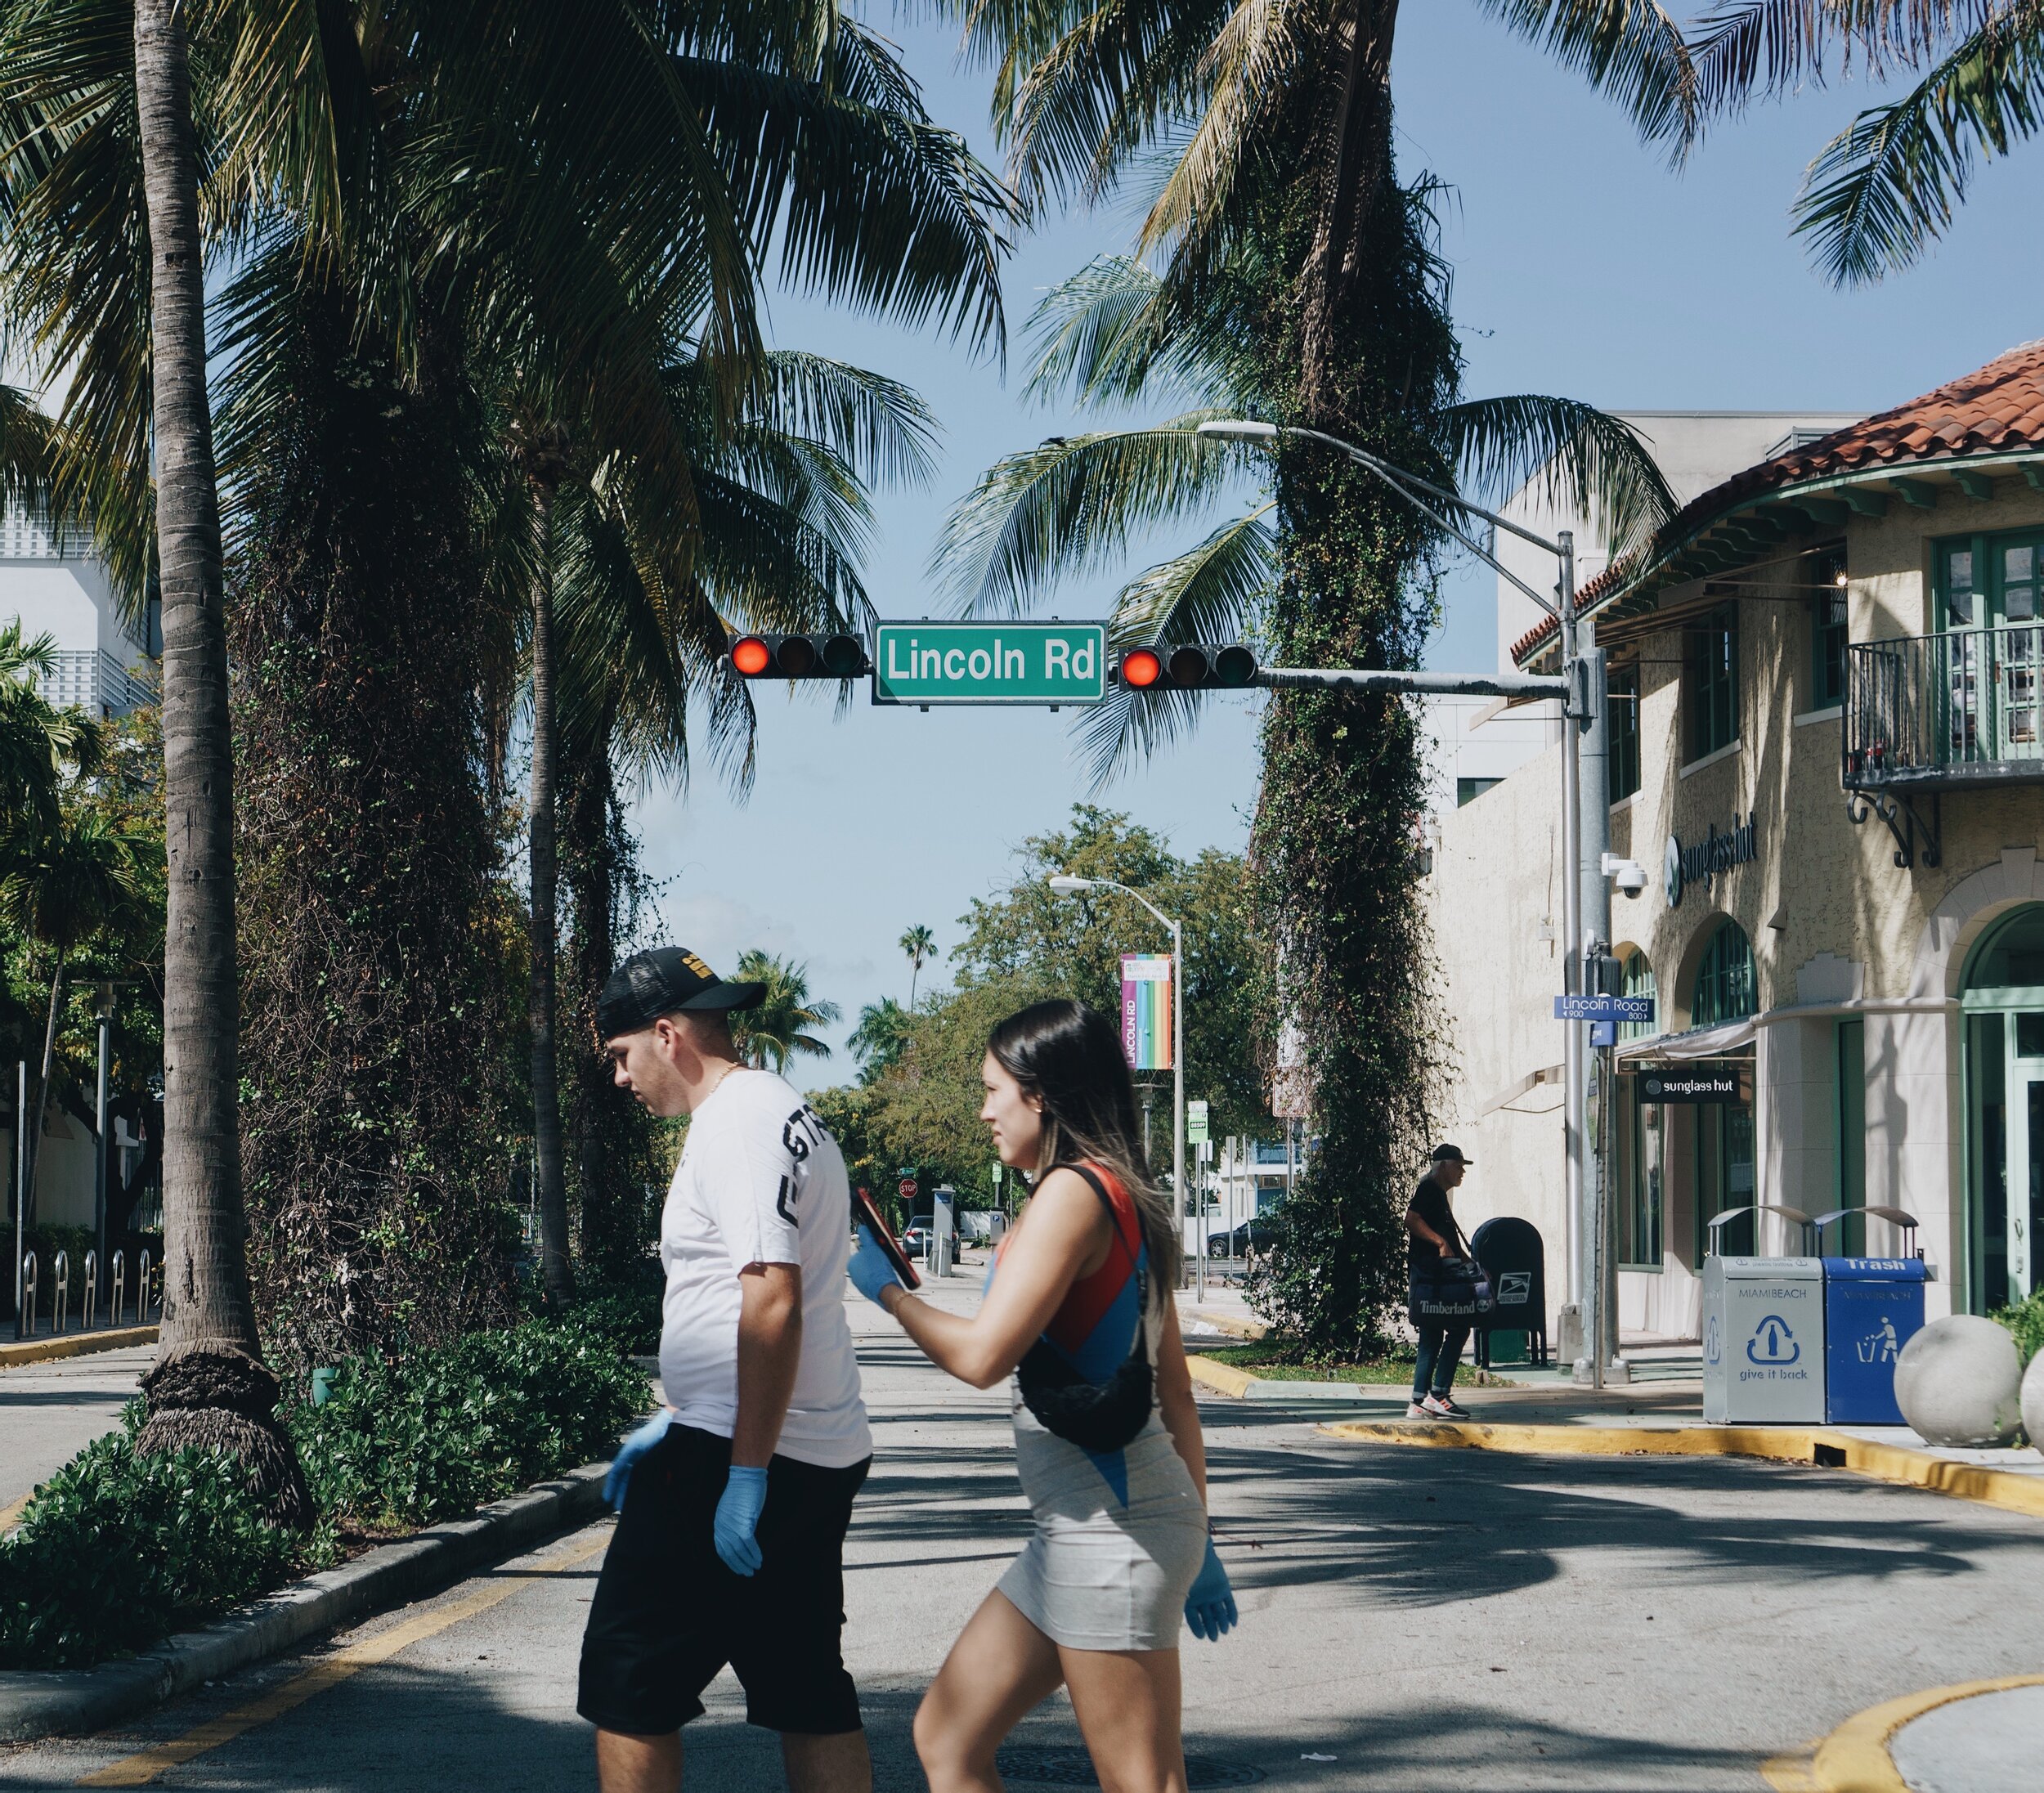 Lincoln Road. March 22, 2020